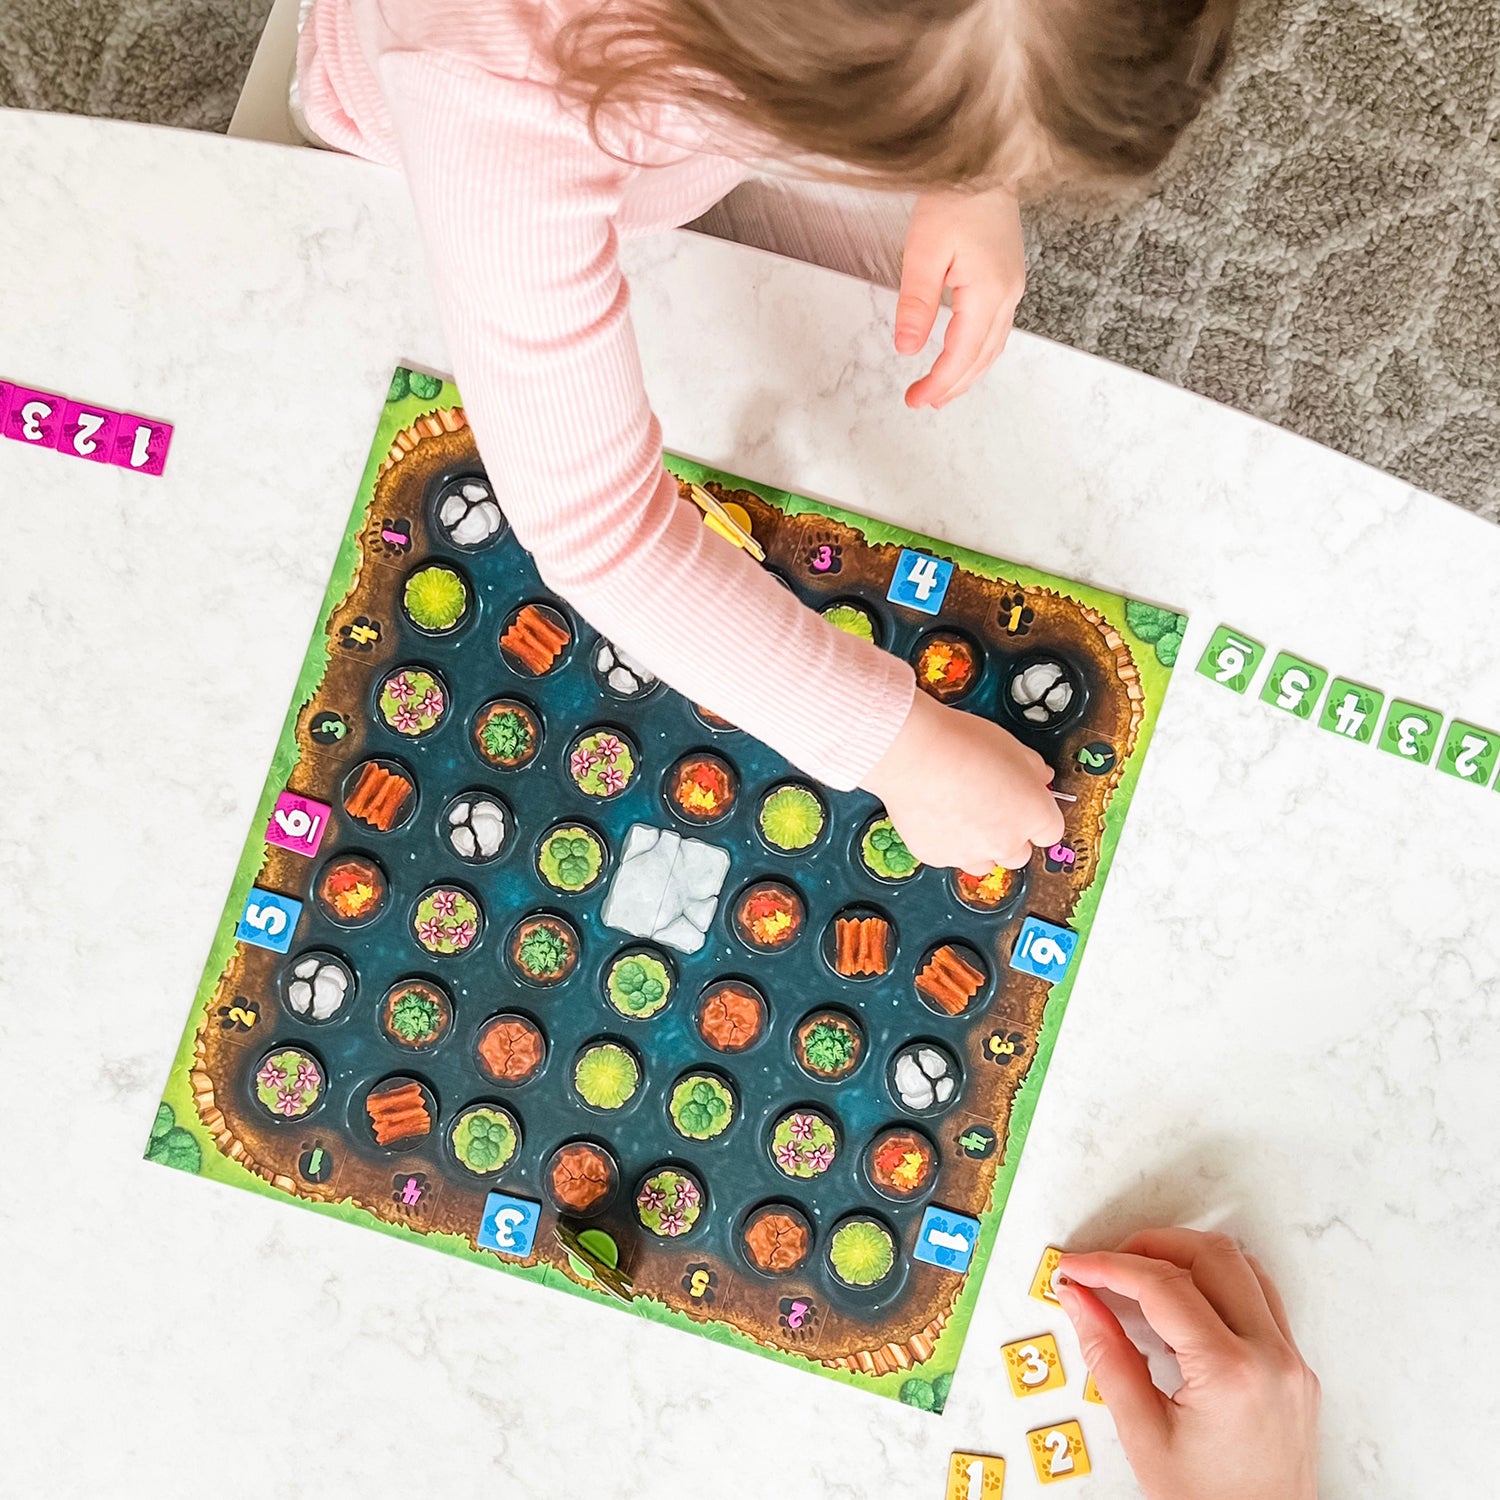 Tar Trackers by SimplyFun is a memory and spatial reasoning game with magnets and cute saber-toothed tigers.